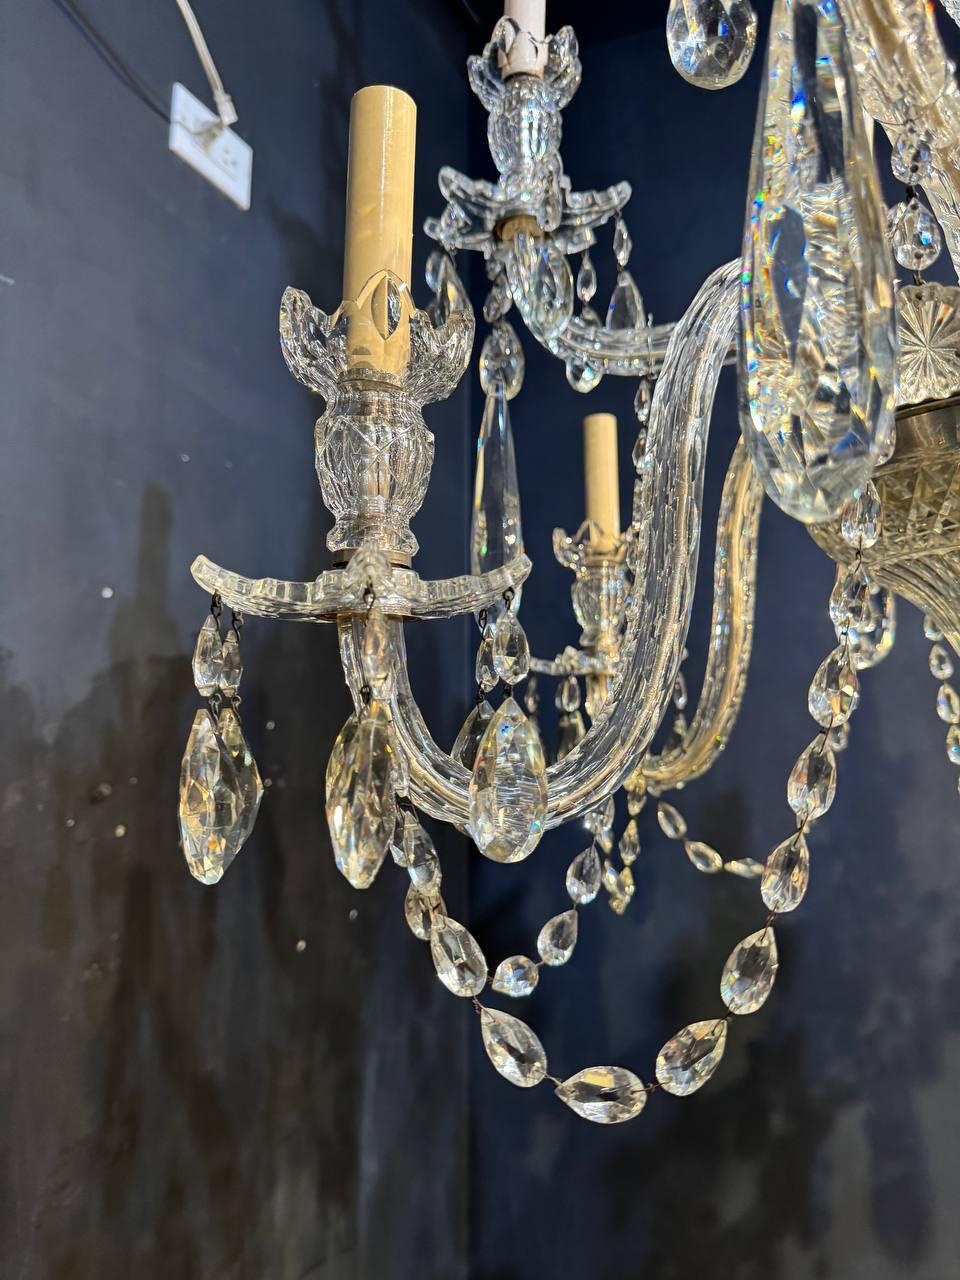 1900’s French Baccarat Crystal Chandelier with 10 Lights For Sale 4